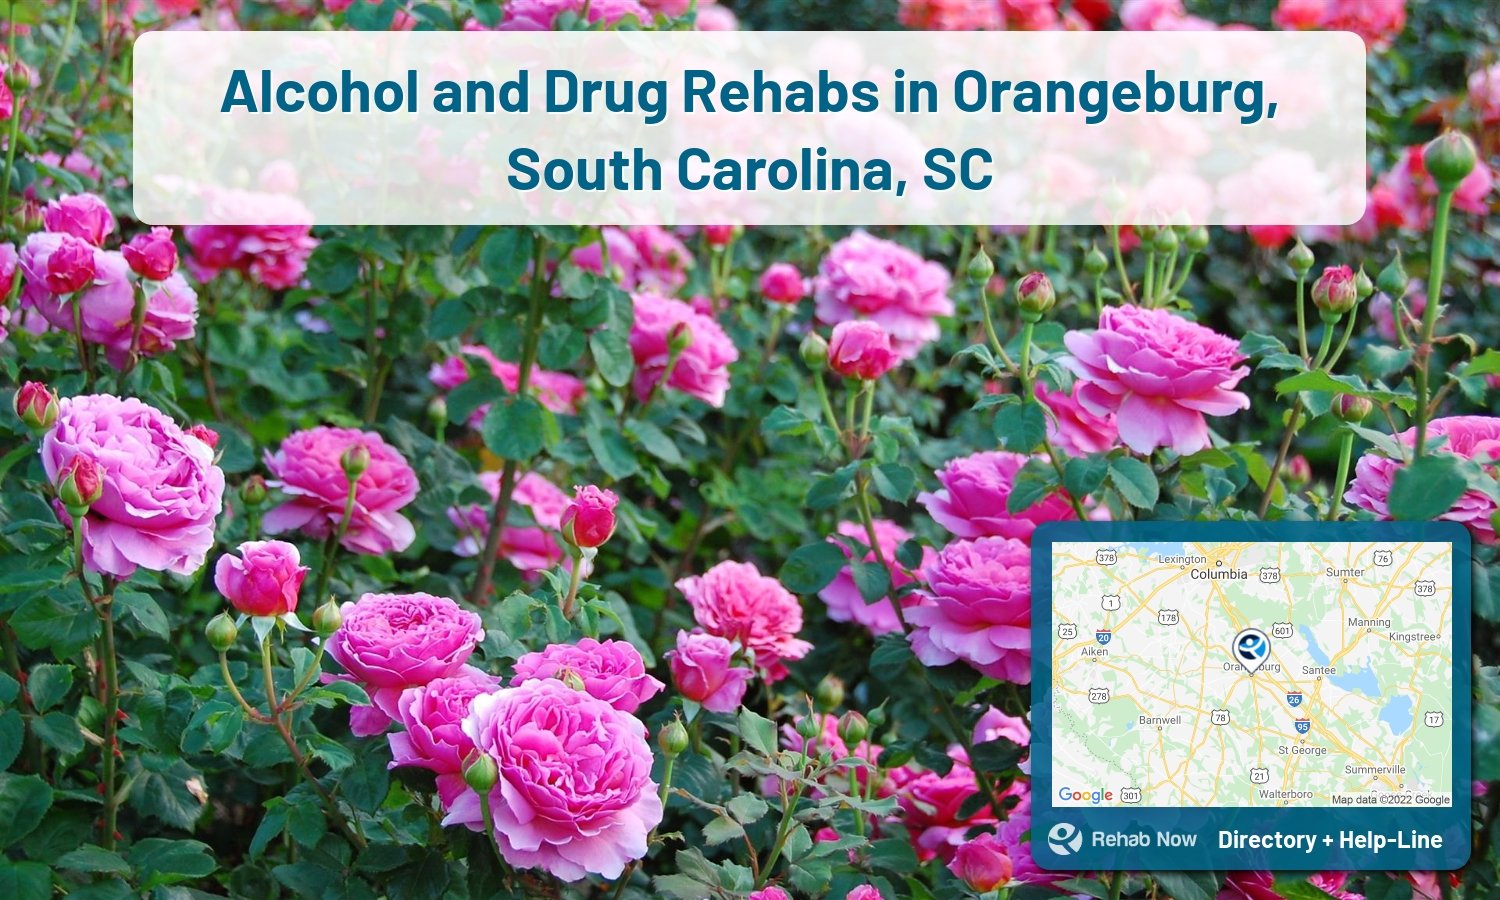 Ready to pick a rehab center in Orangeburg? Get off alcohol, opiates, and other drugs, by selecting top drug rehab centers in South Carolina